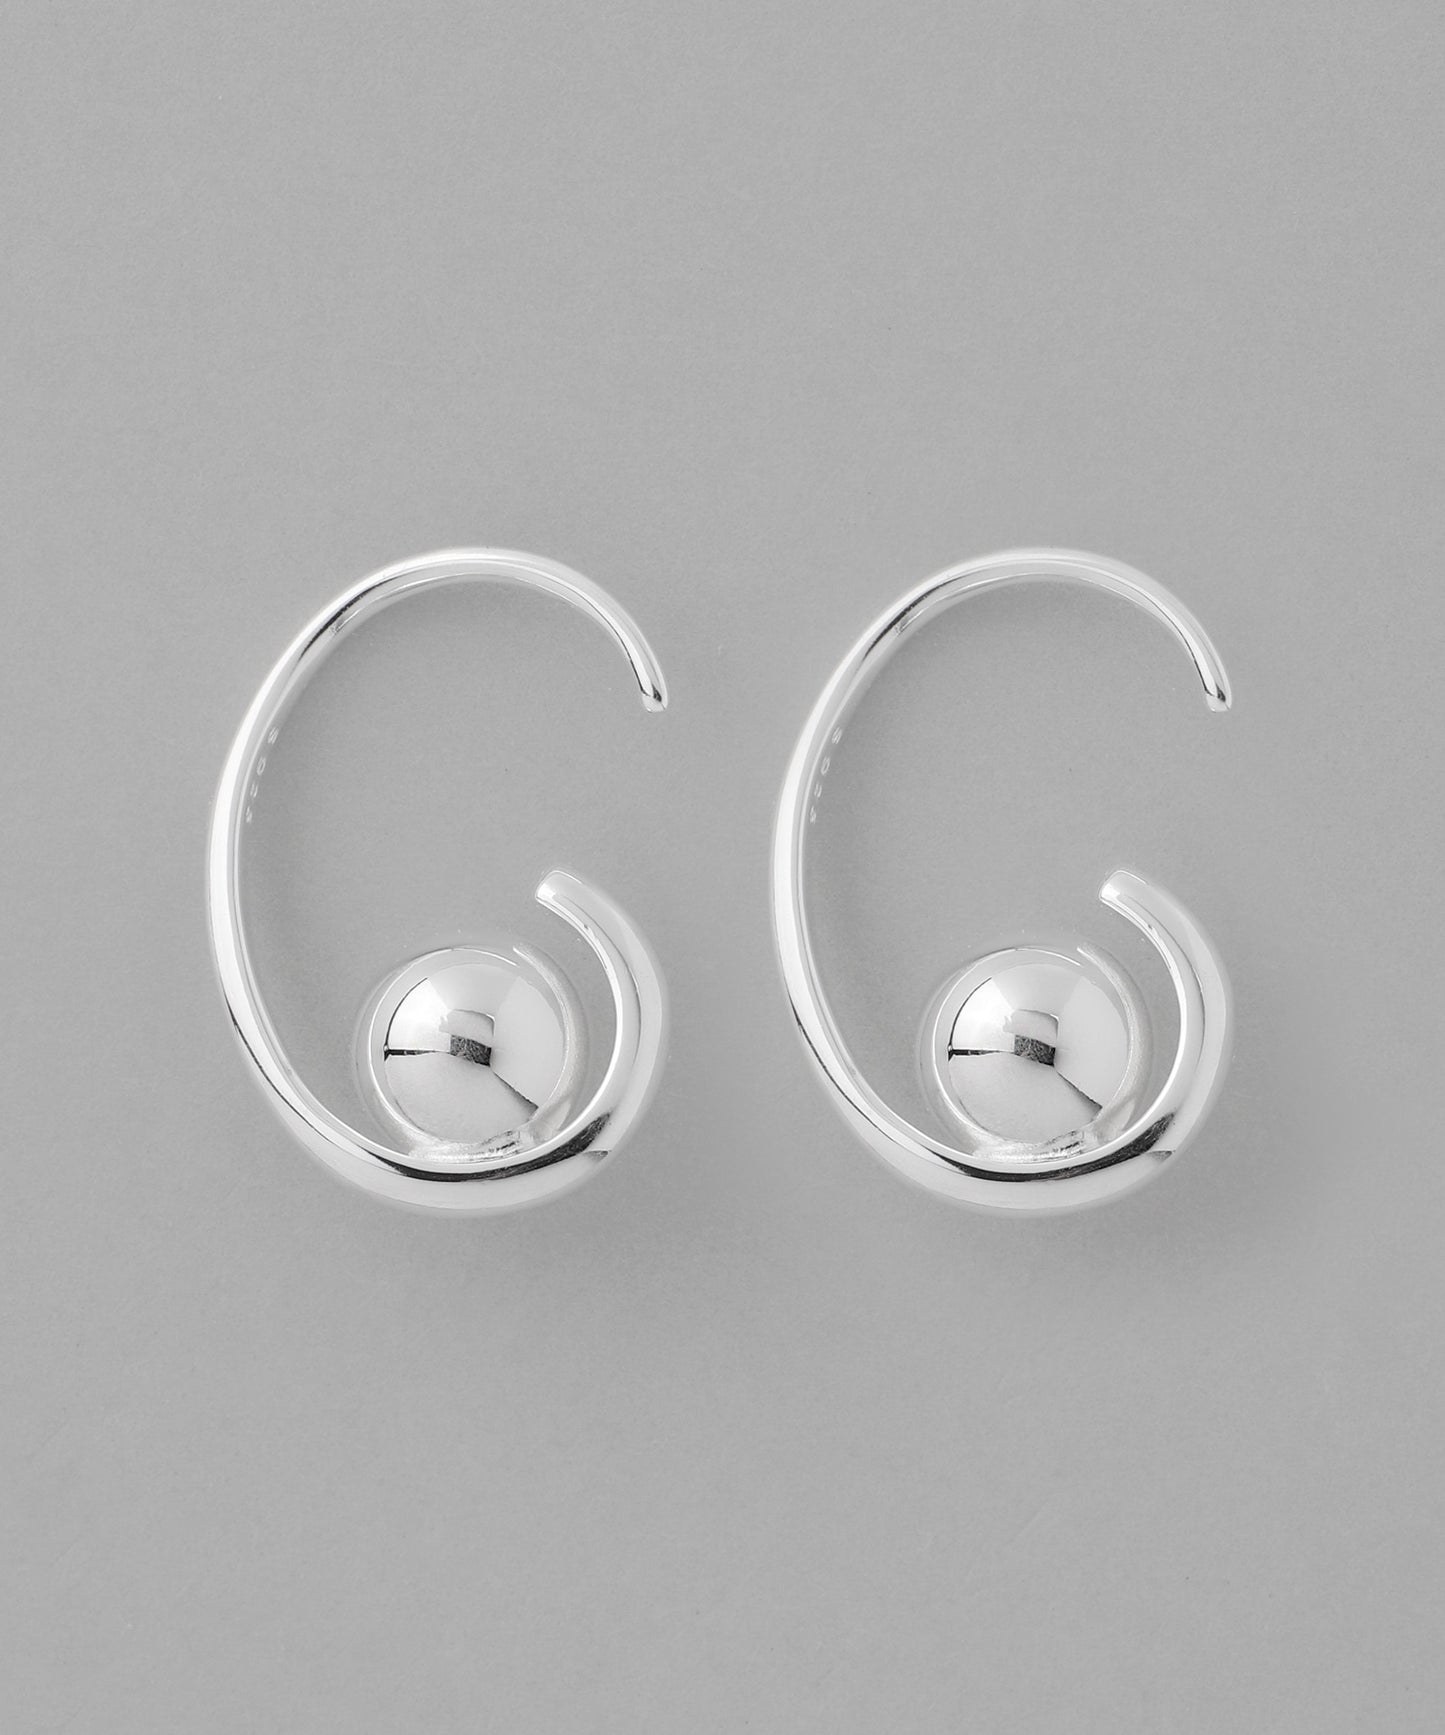 【Eligible for Novelty】Vintage Earrings [925 silver][C]